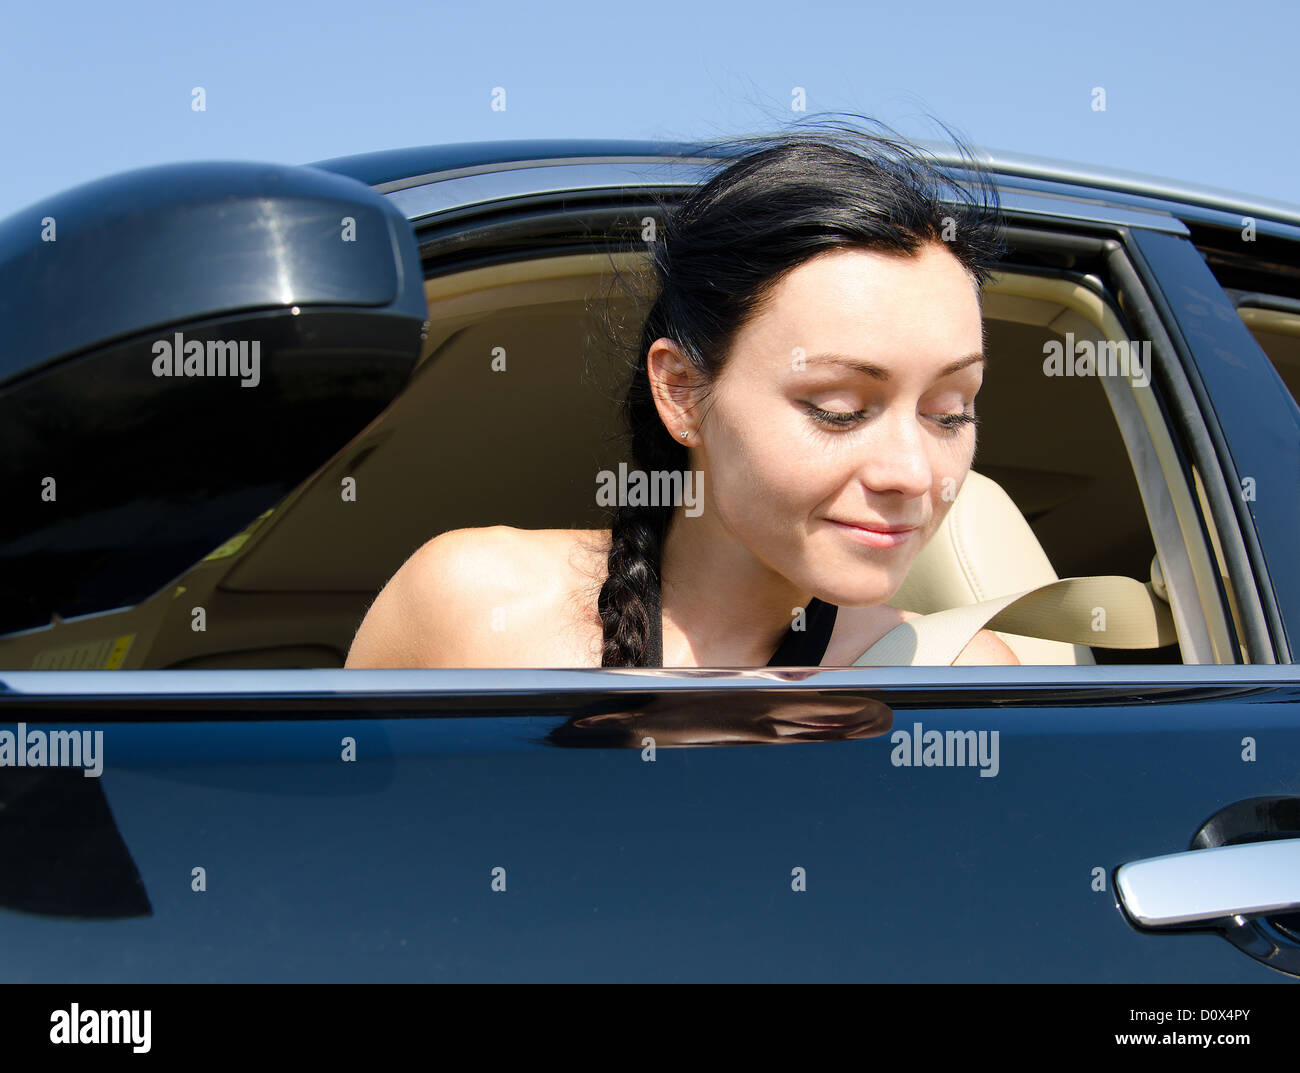 Woman looking out of her car window peering down at the ground with a smile on her face Stock Photo